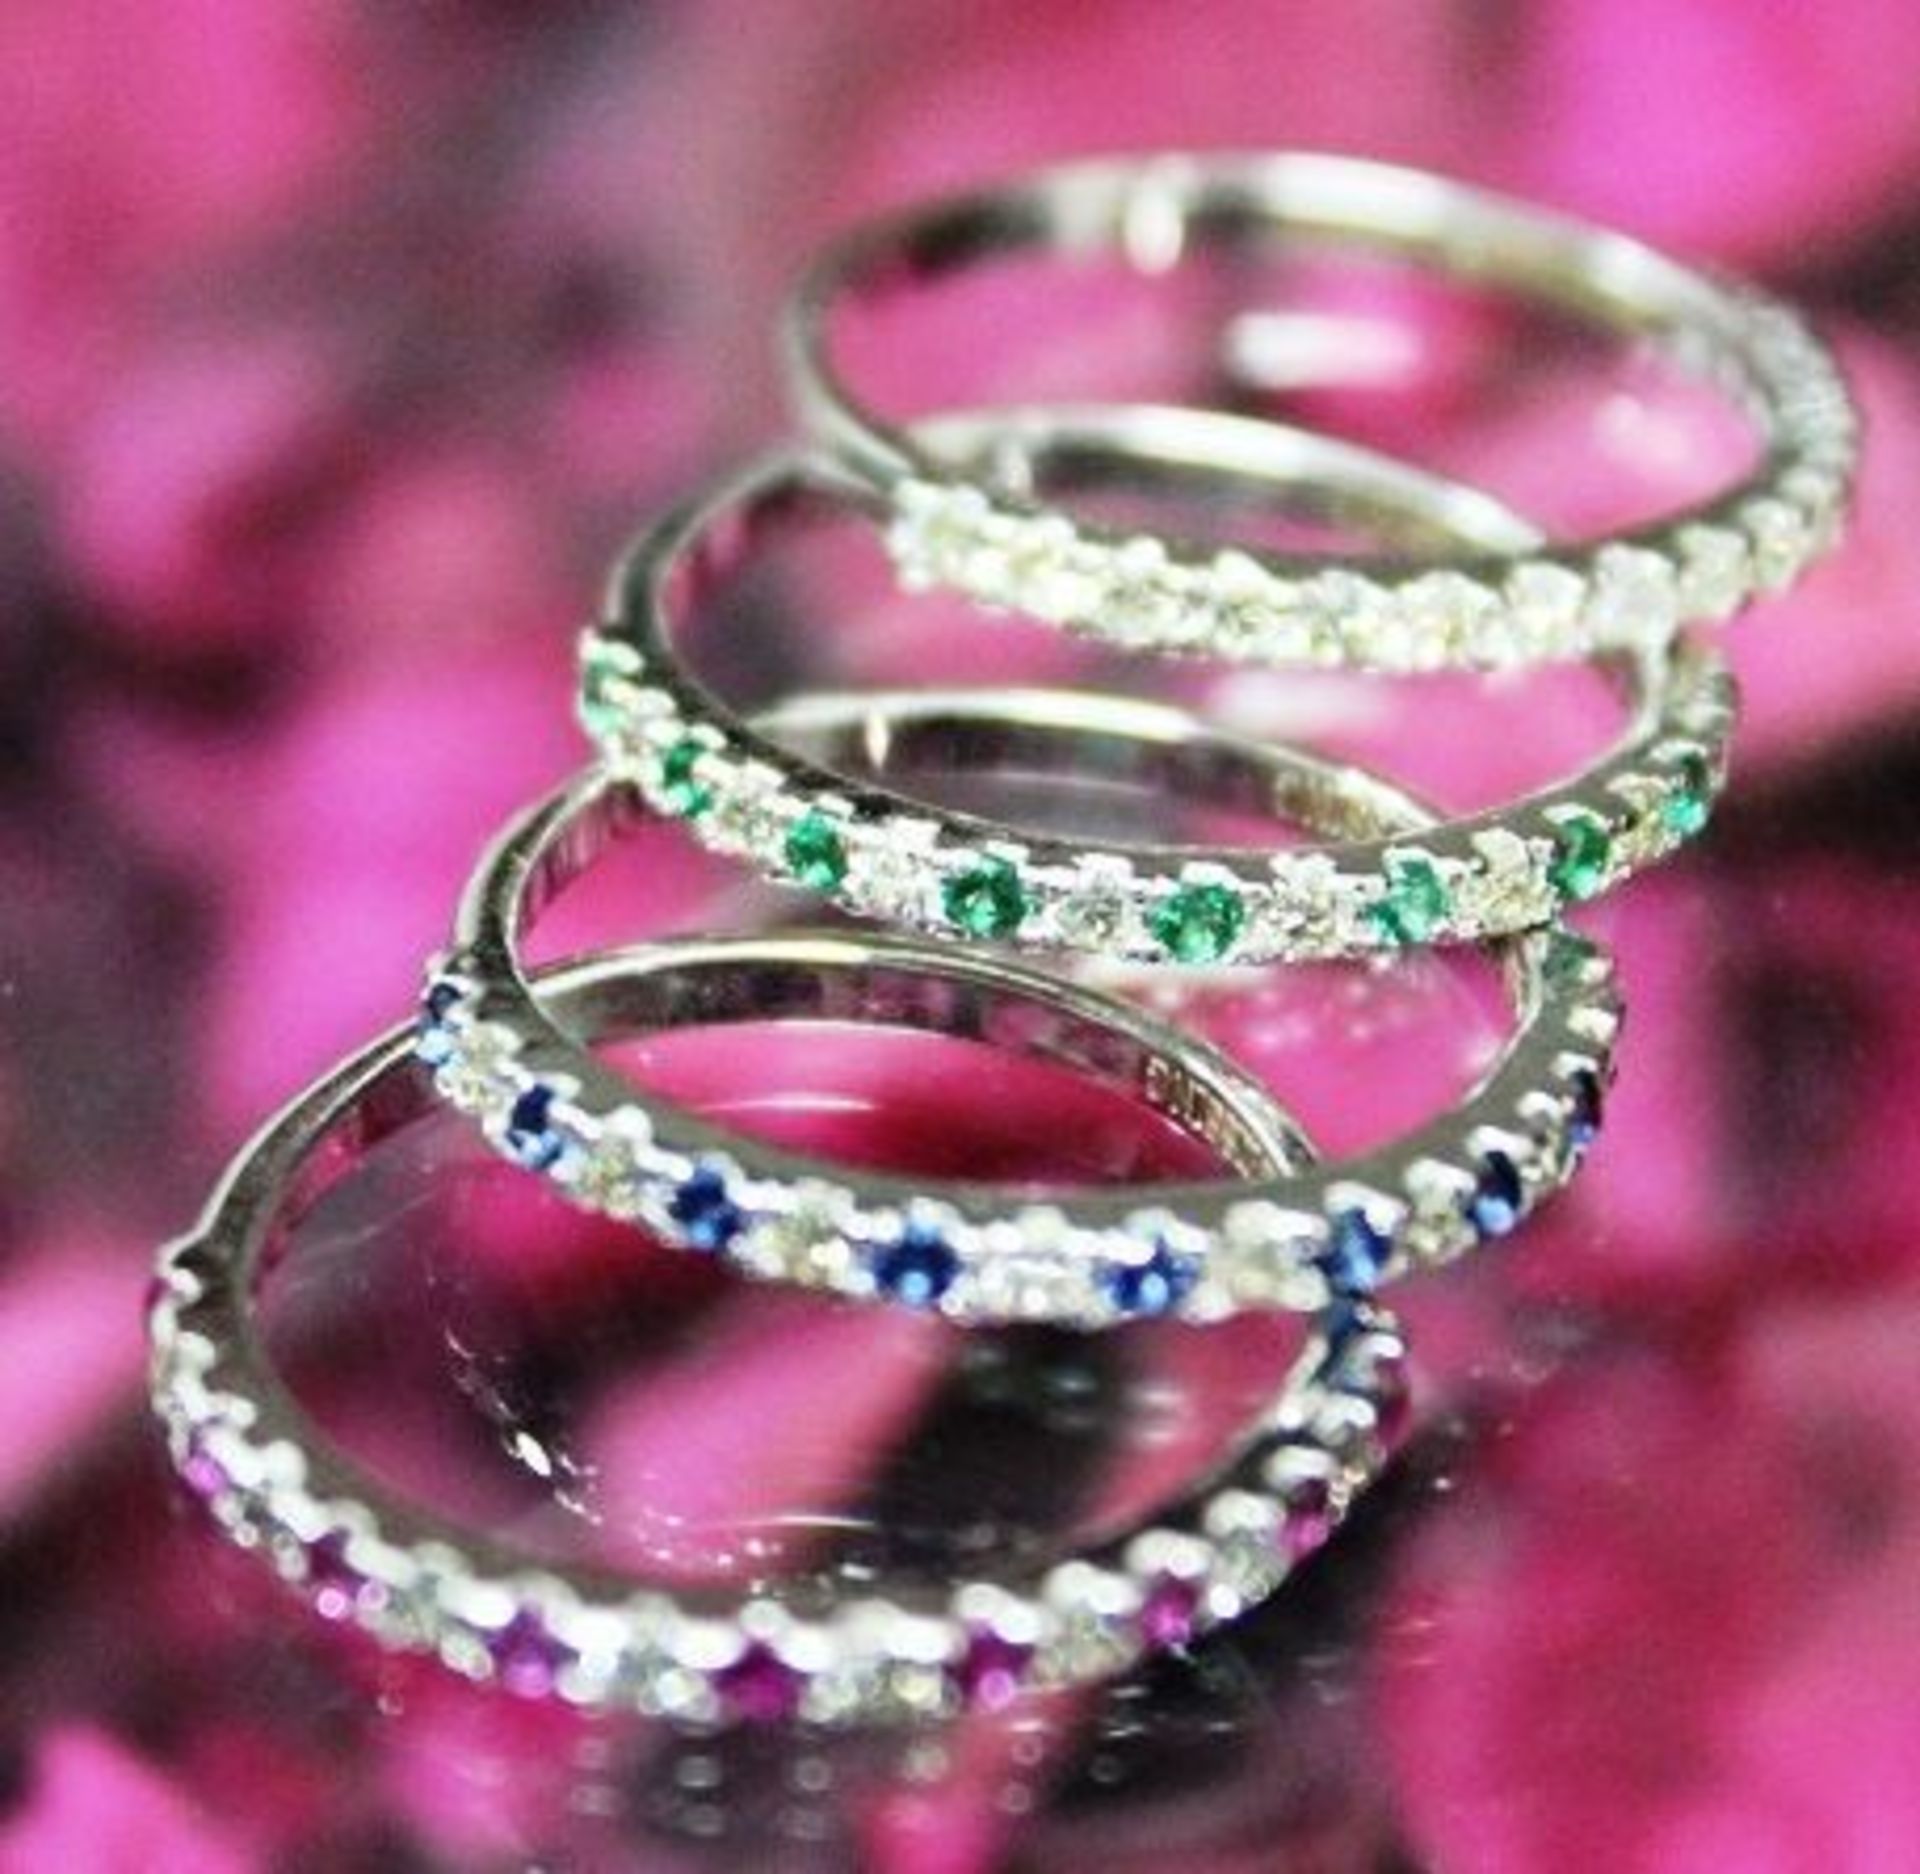 14 K / 585 Set of 4 Diamond, Blue Sapphire, Emerald and Ruby Rings